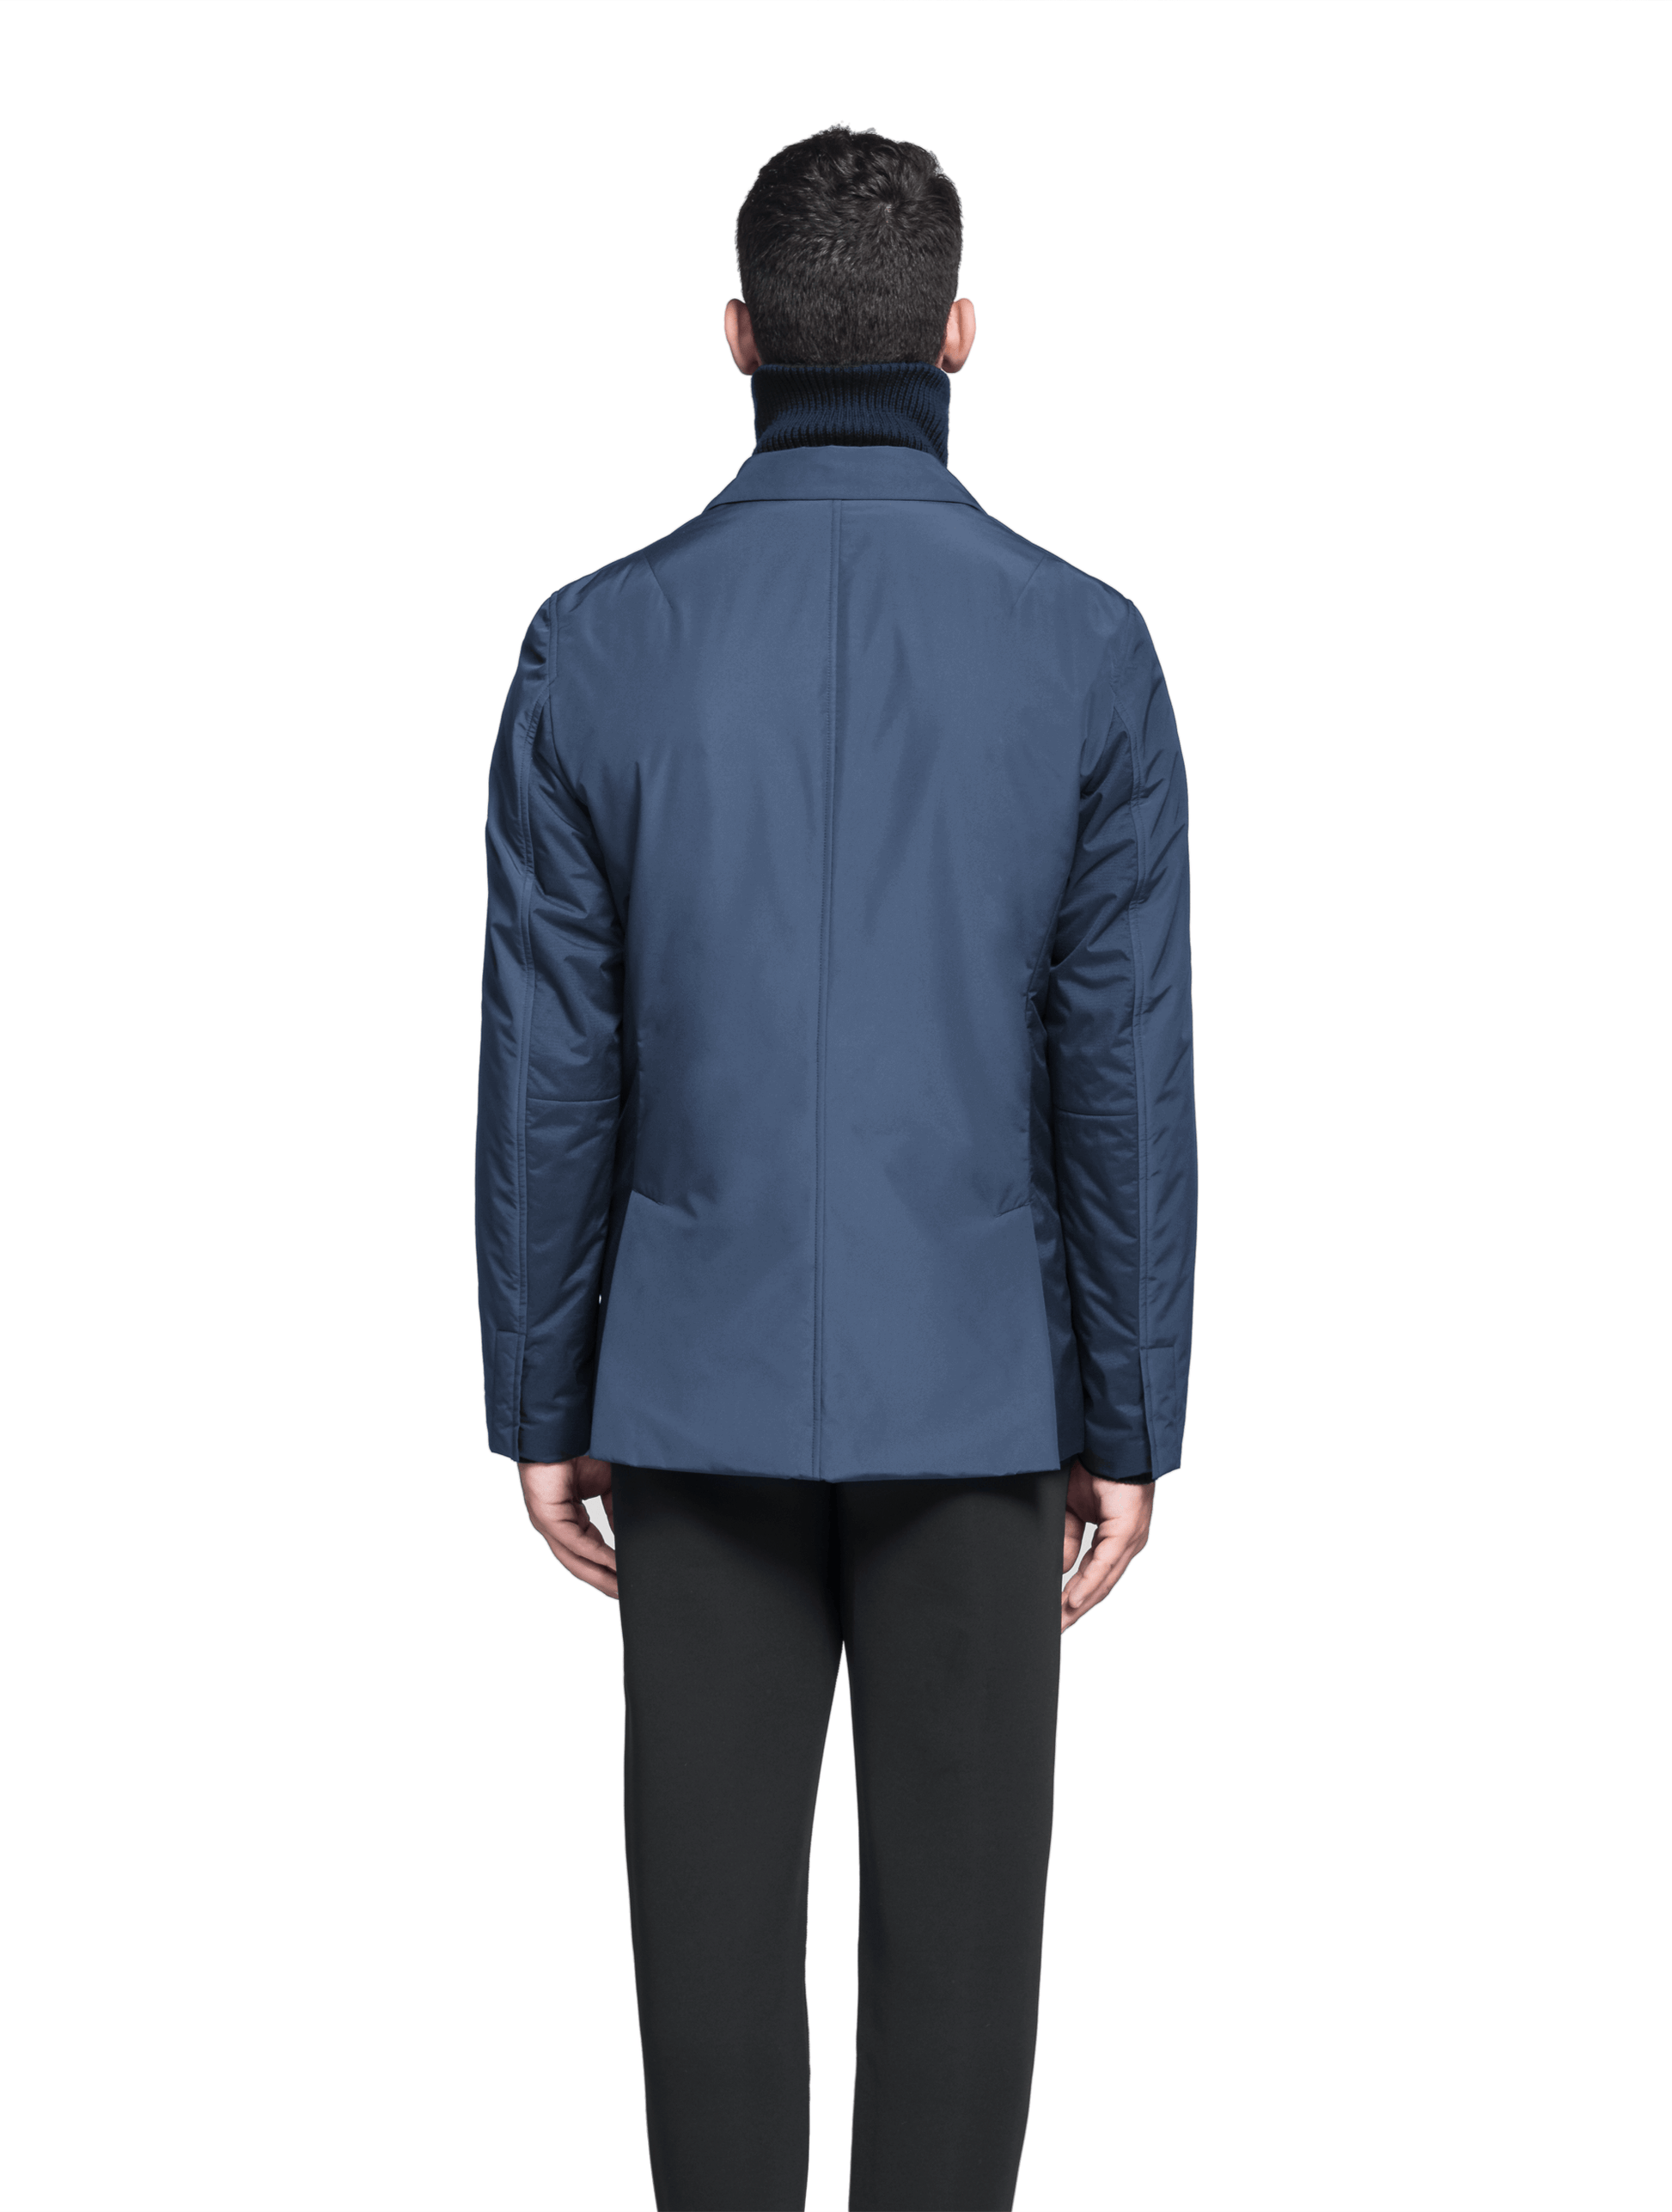 Cody Men's Tailored Travel Blazer in 3-ply micro denier and stretch nylon fabrication with DWR coating, Primaloft Gold Insulation Active+, hidden two-way zipper at centre front with snap closure placket, three invisible exterior zipper pockets, double back pleats, and hidden snap placket at cuffs, in Marine